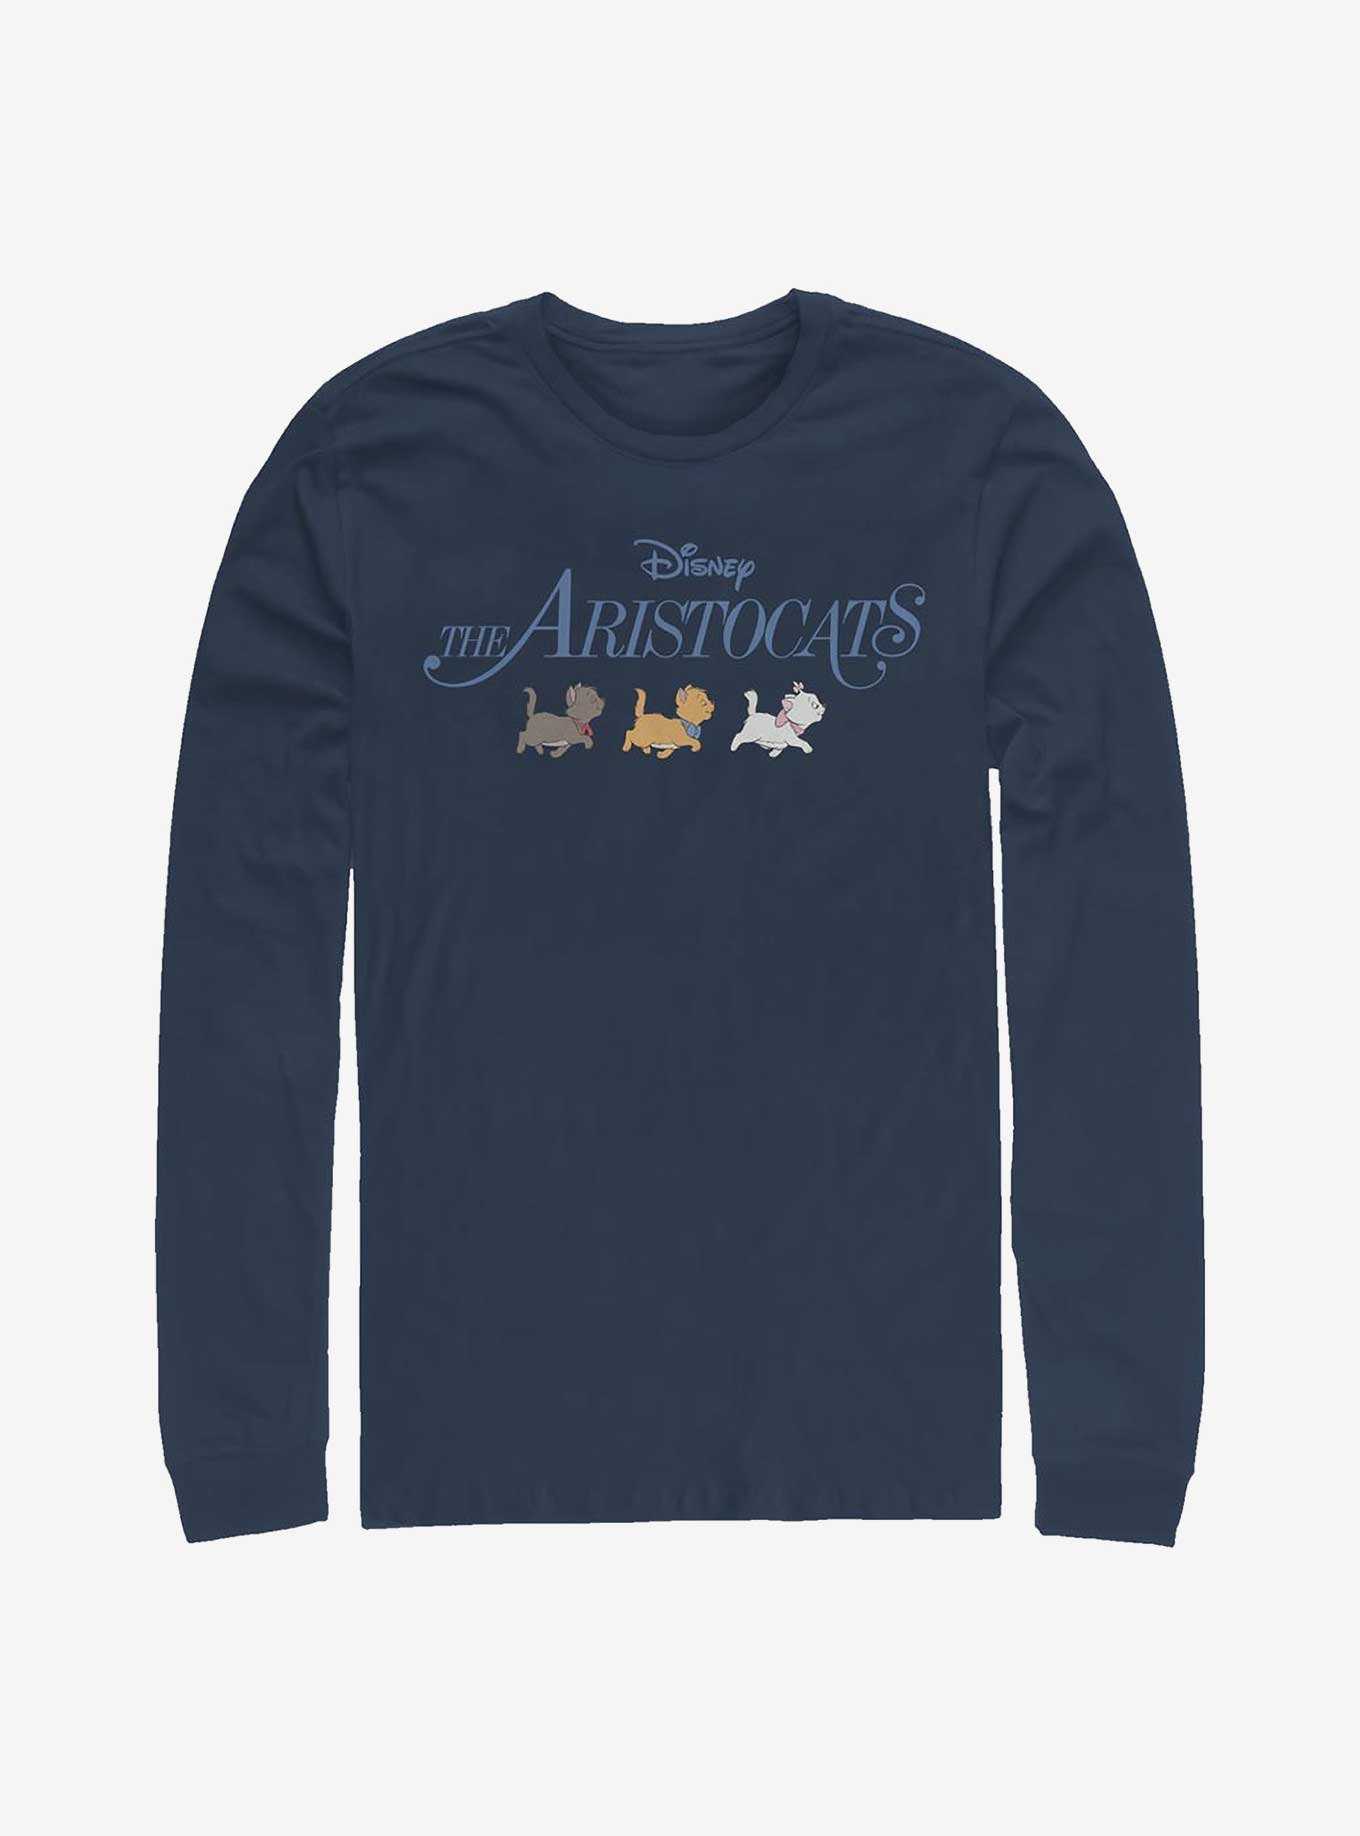 OFFICIAL The Aristocats Shirts, Gifts & Merchandise | Boxlunch | T-Shirts